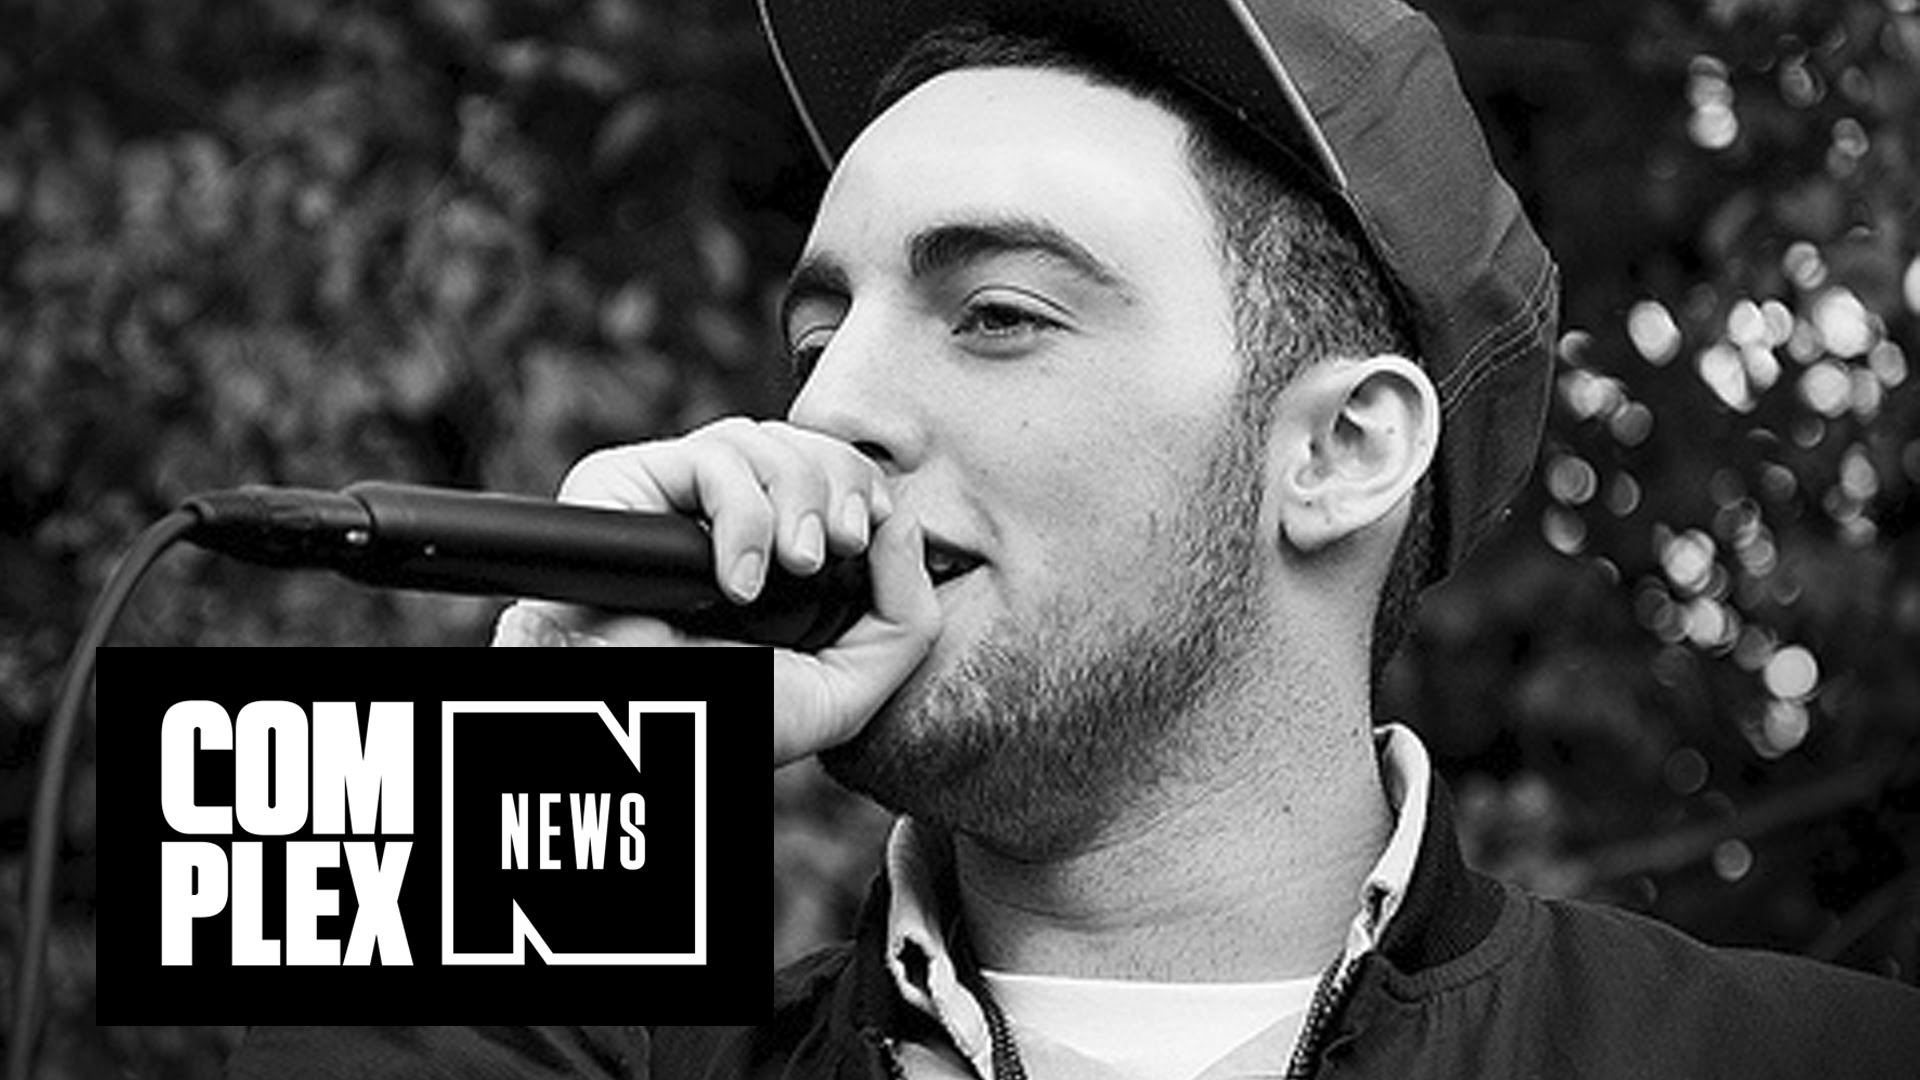 Mac Miller Talks White Guilt and Opens Up About His Past Drug Use in New Documentary